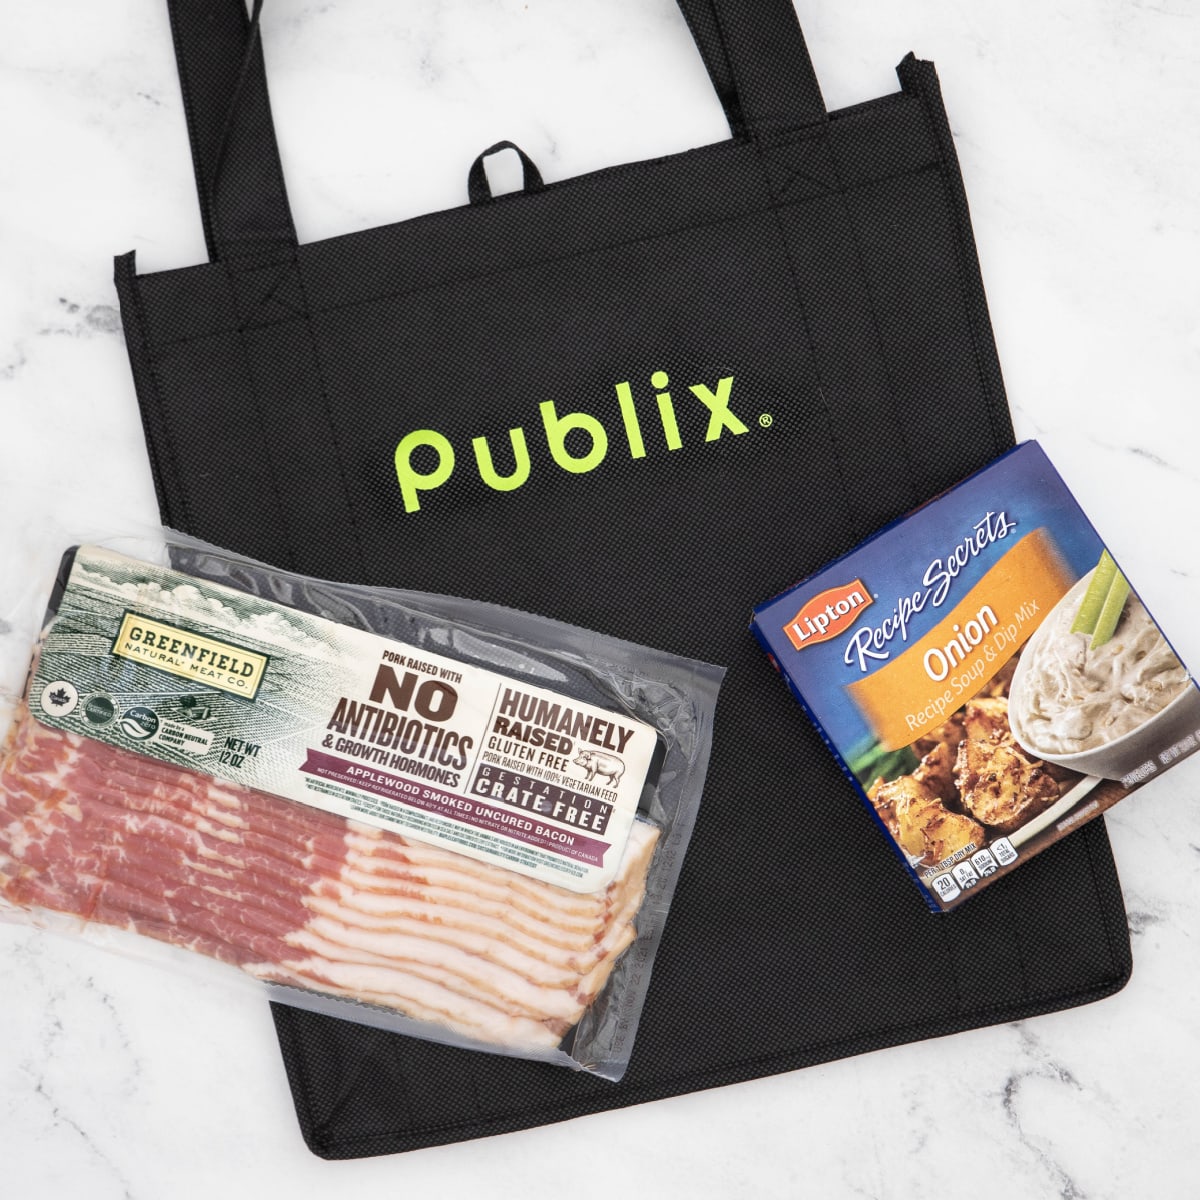 Publix bag with Greenfield Bacon and Lipton Recipe Secrets